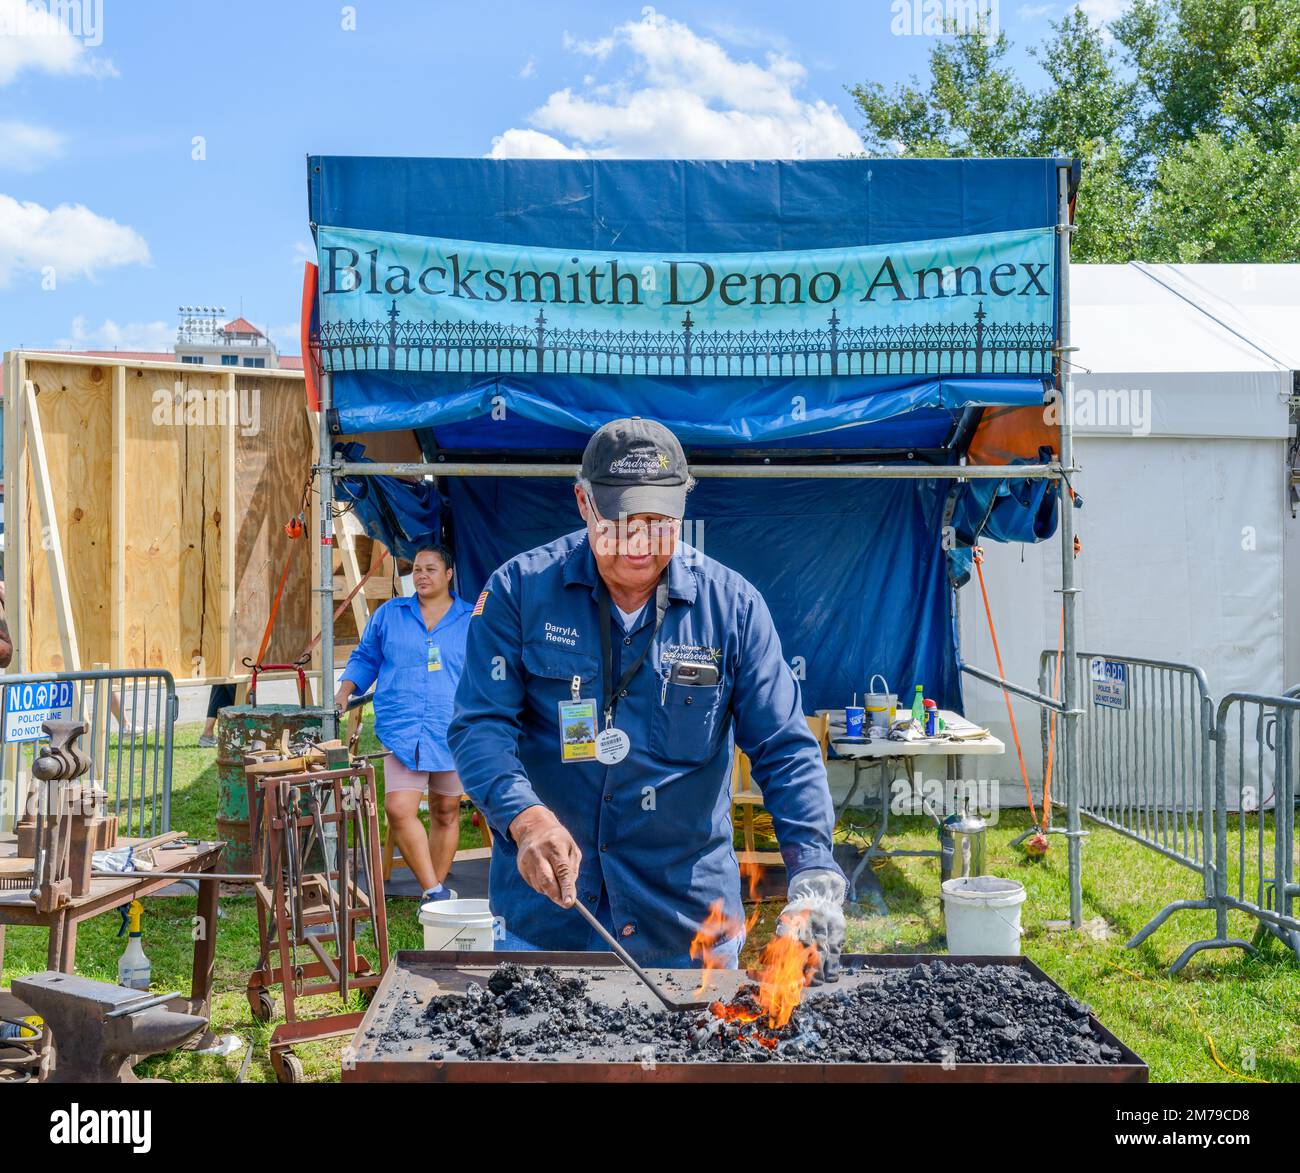 NEW ORLEANS, LA, USA - APRIL 29, 2022: Blacksmith demonstrating toolmaking craft at the New Orleans Jazz and Heritage Festival Stock Photo